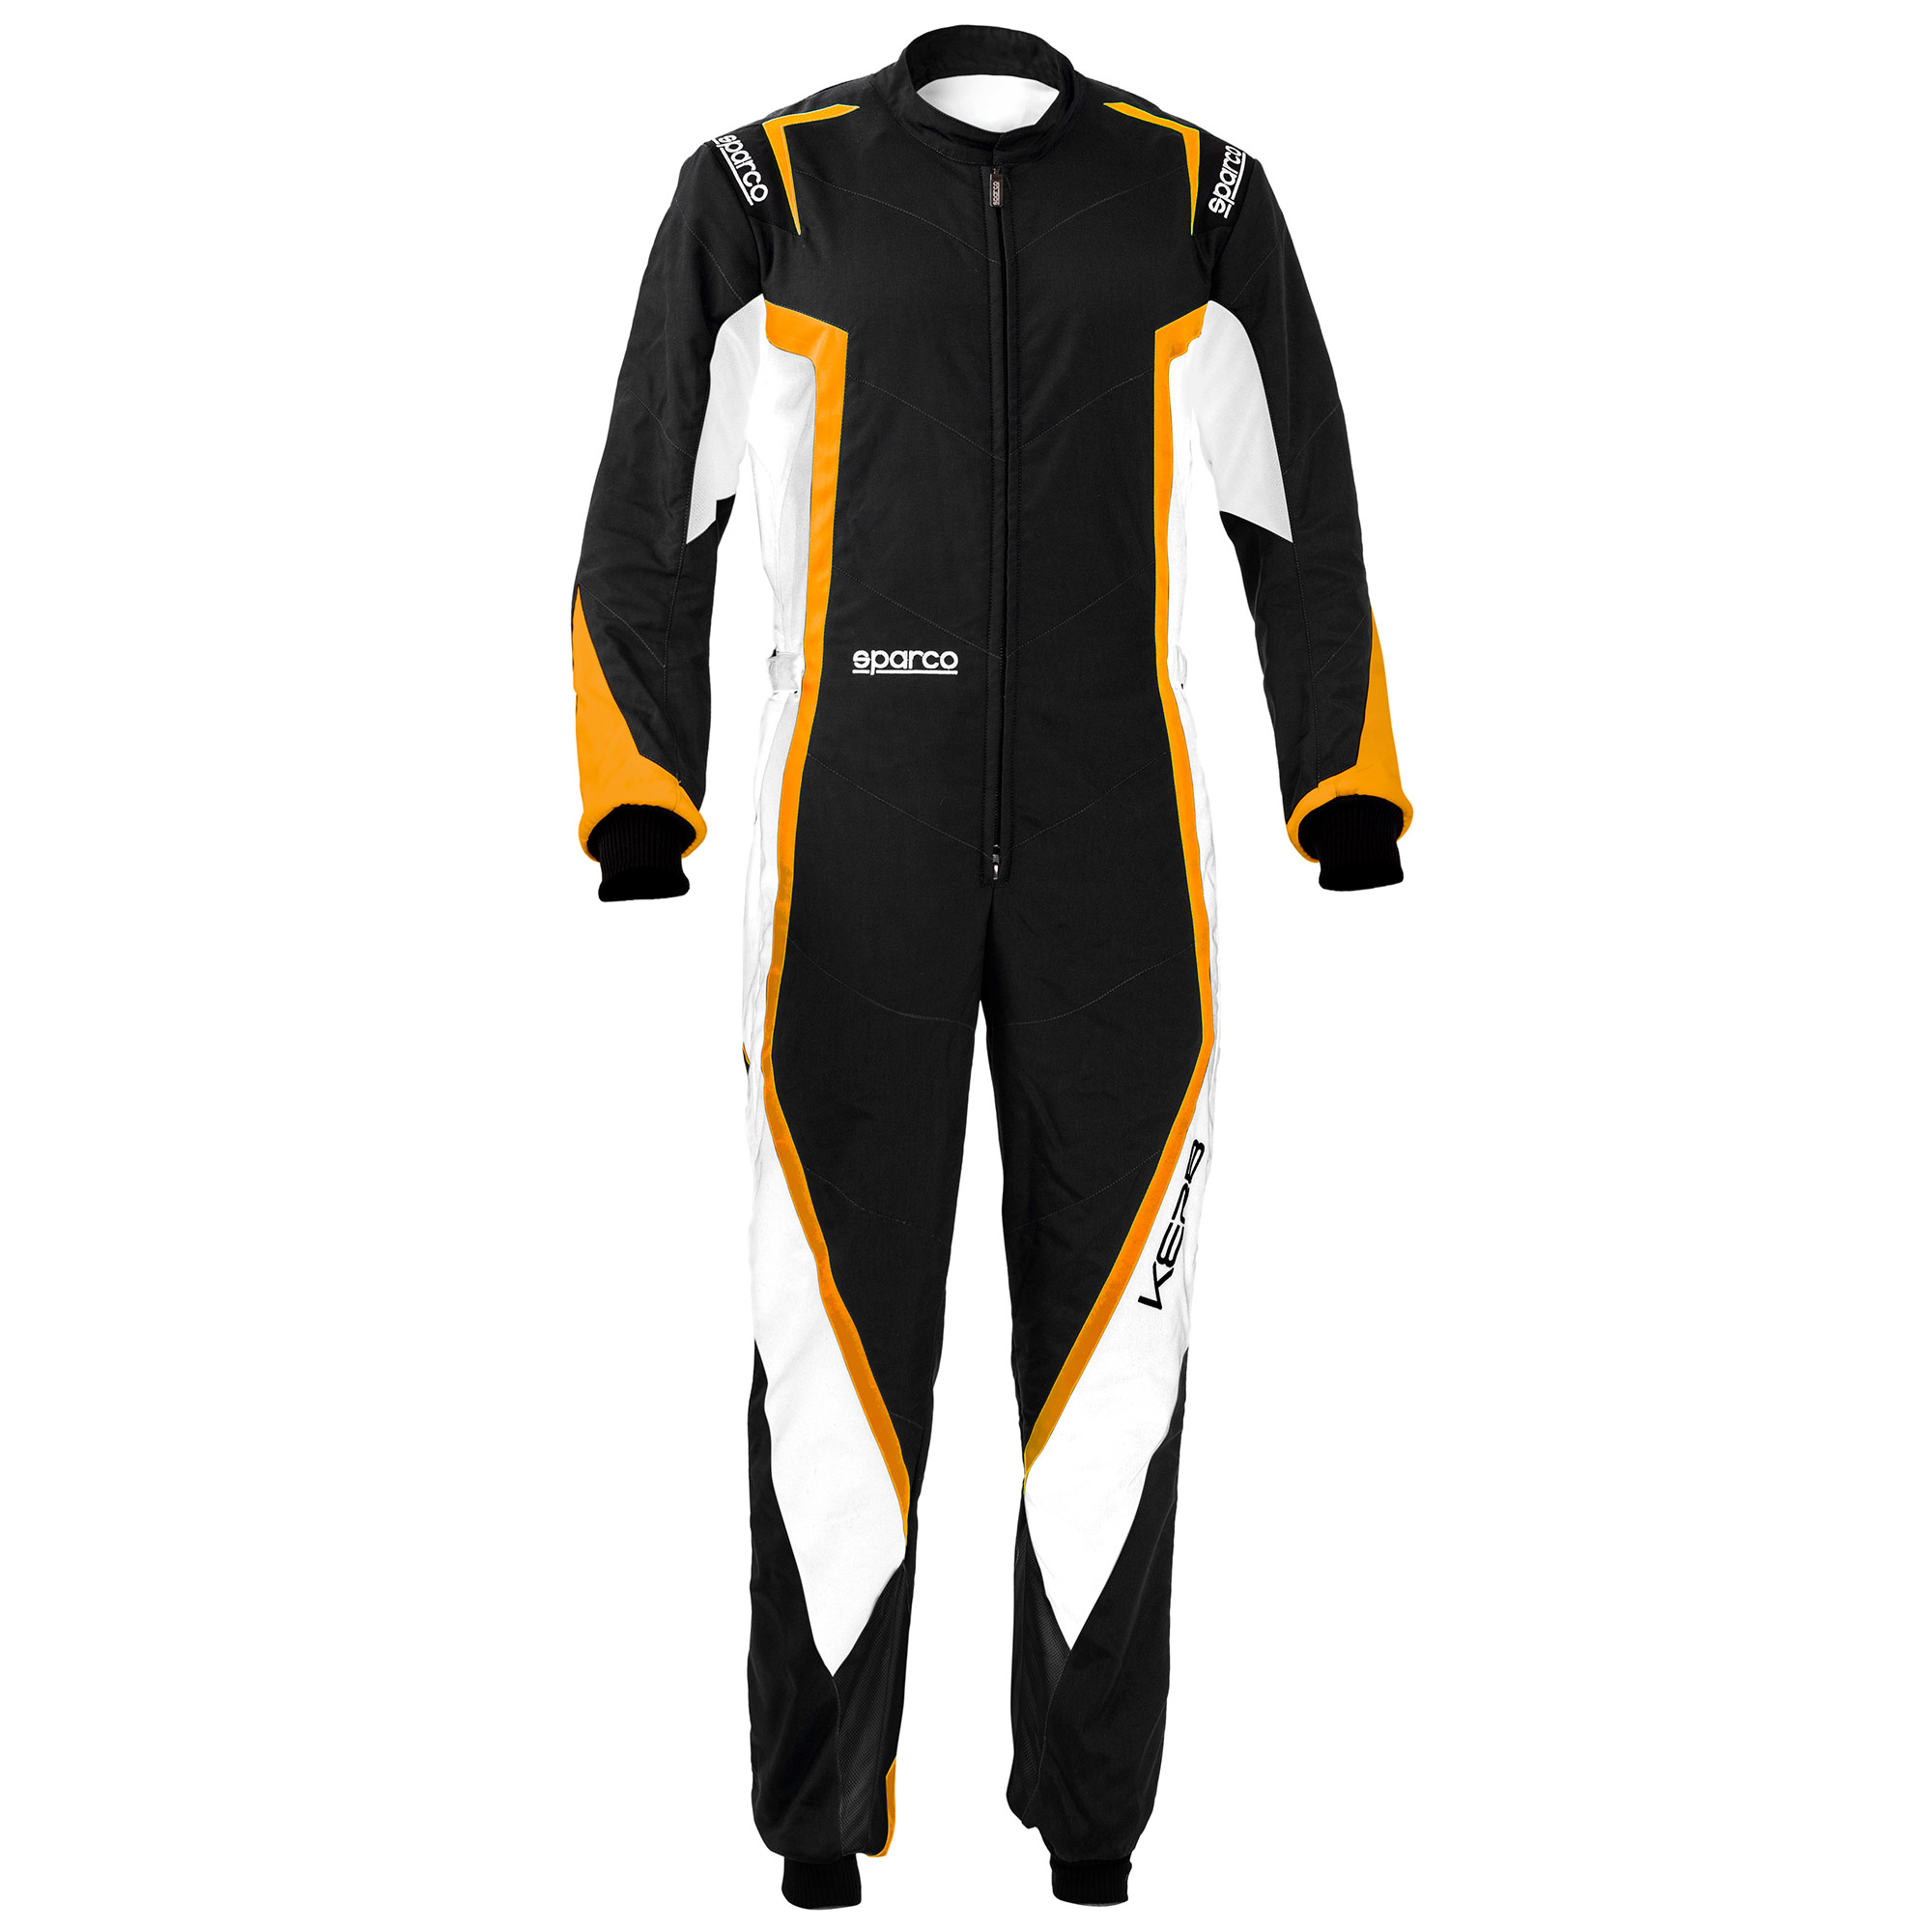 Details about   Go Kart Race Suit FA CIK-FIA Level 2 Approved with free gift 